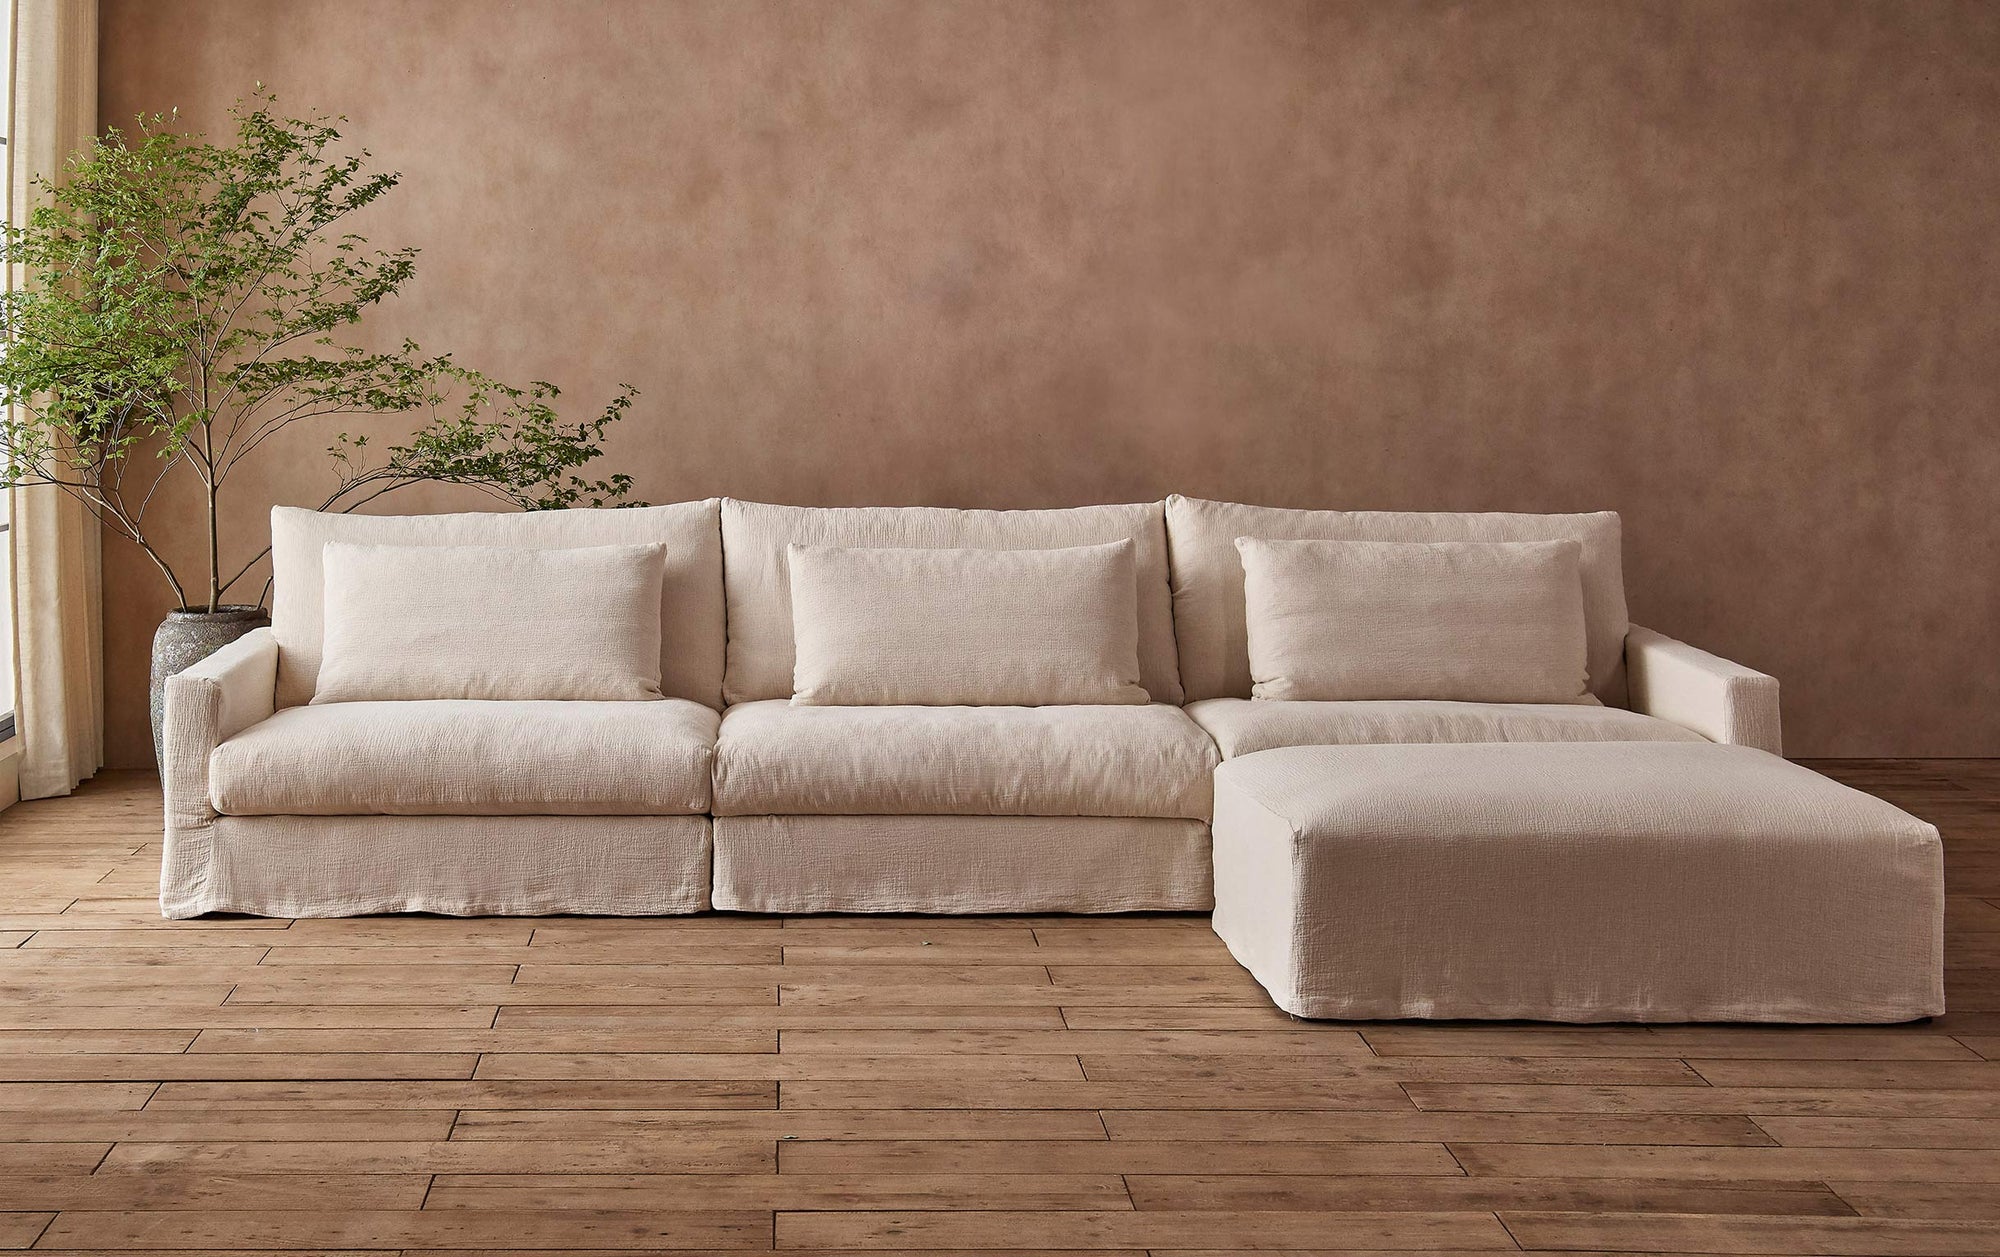 Devyn 4-piece Chaise Sectional Sofa in Corn Silk, a light beige Washed Cotton Linen, placed in front of a warm, golden-brown wall and a large potted plant